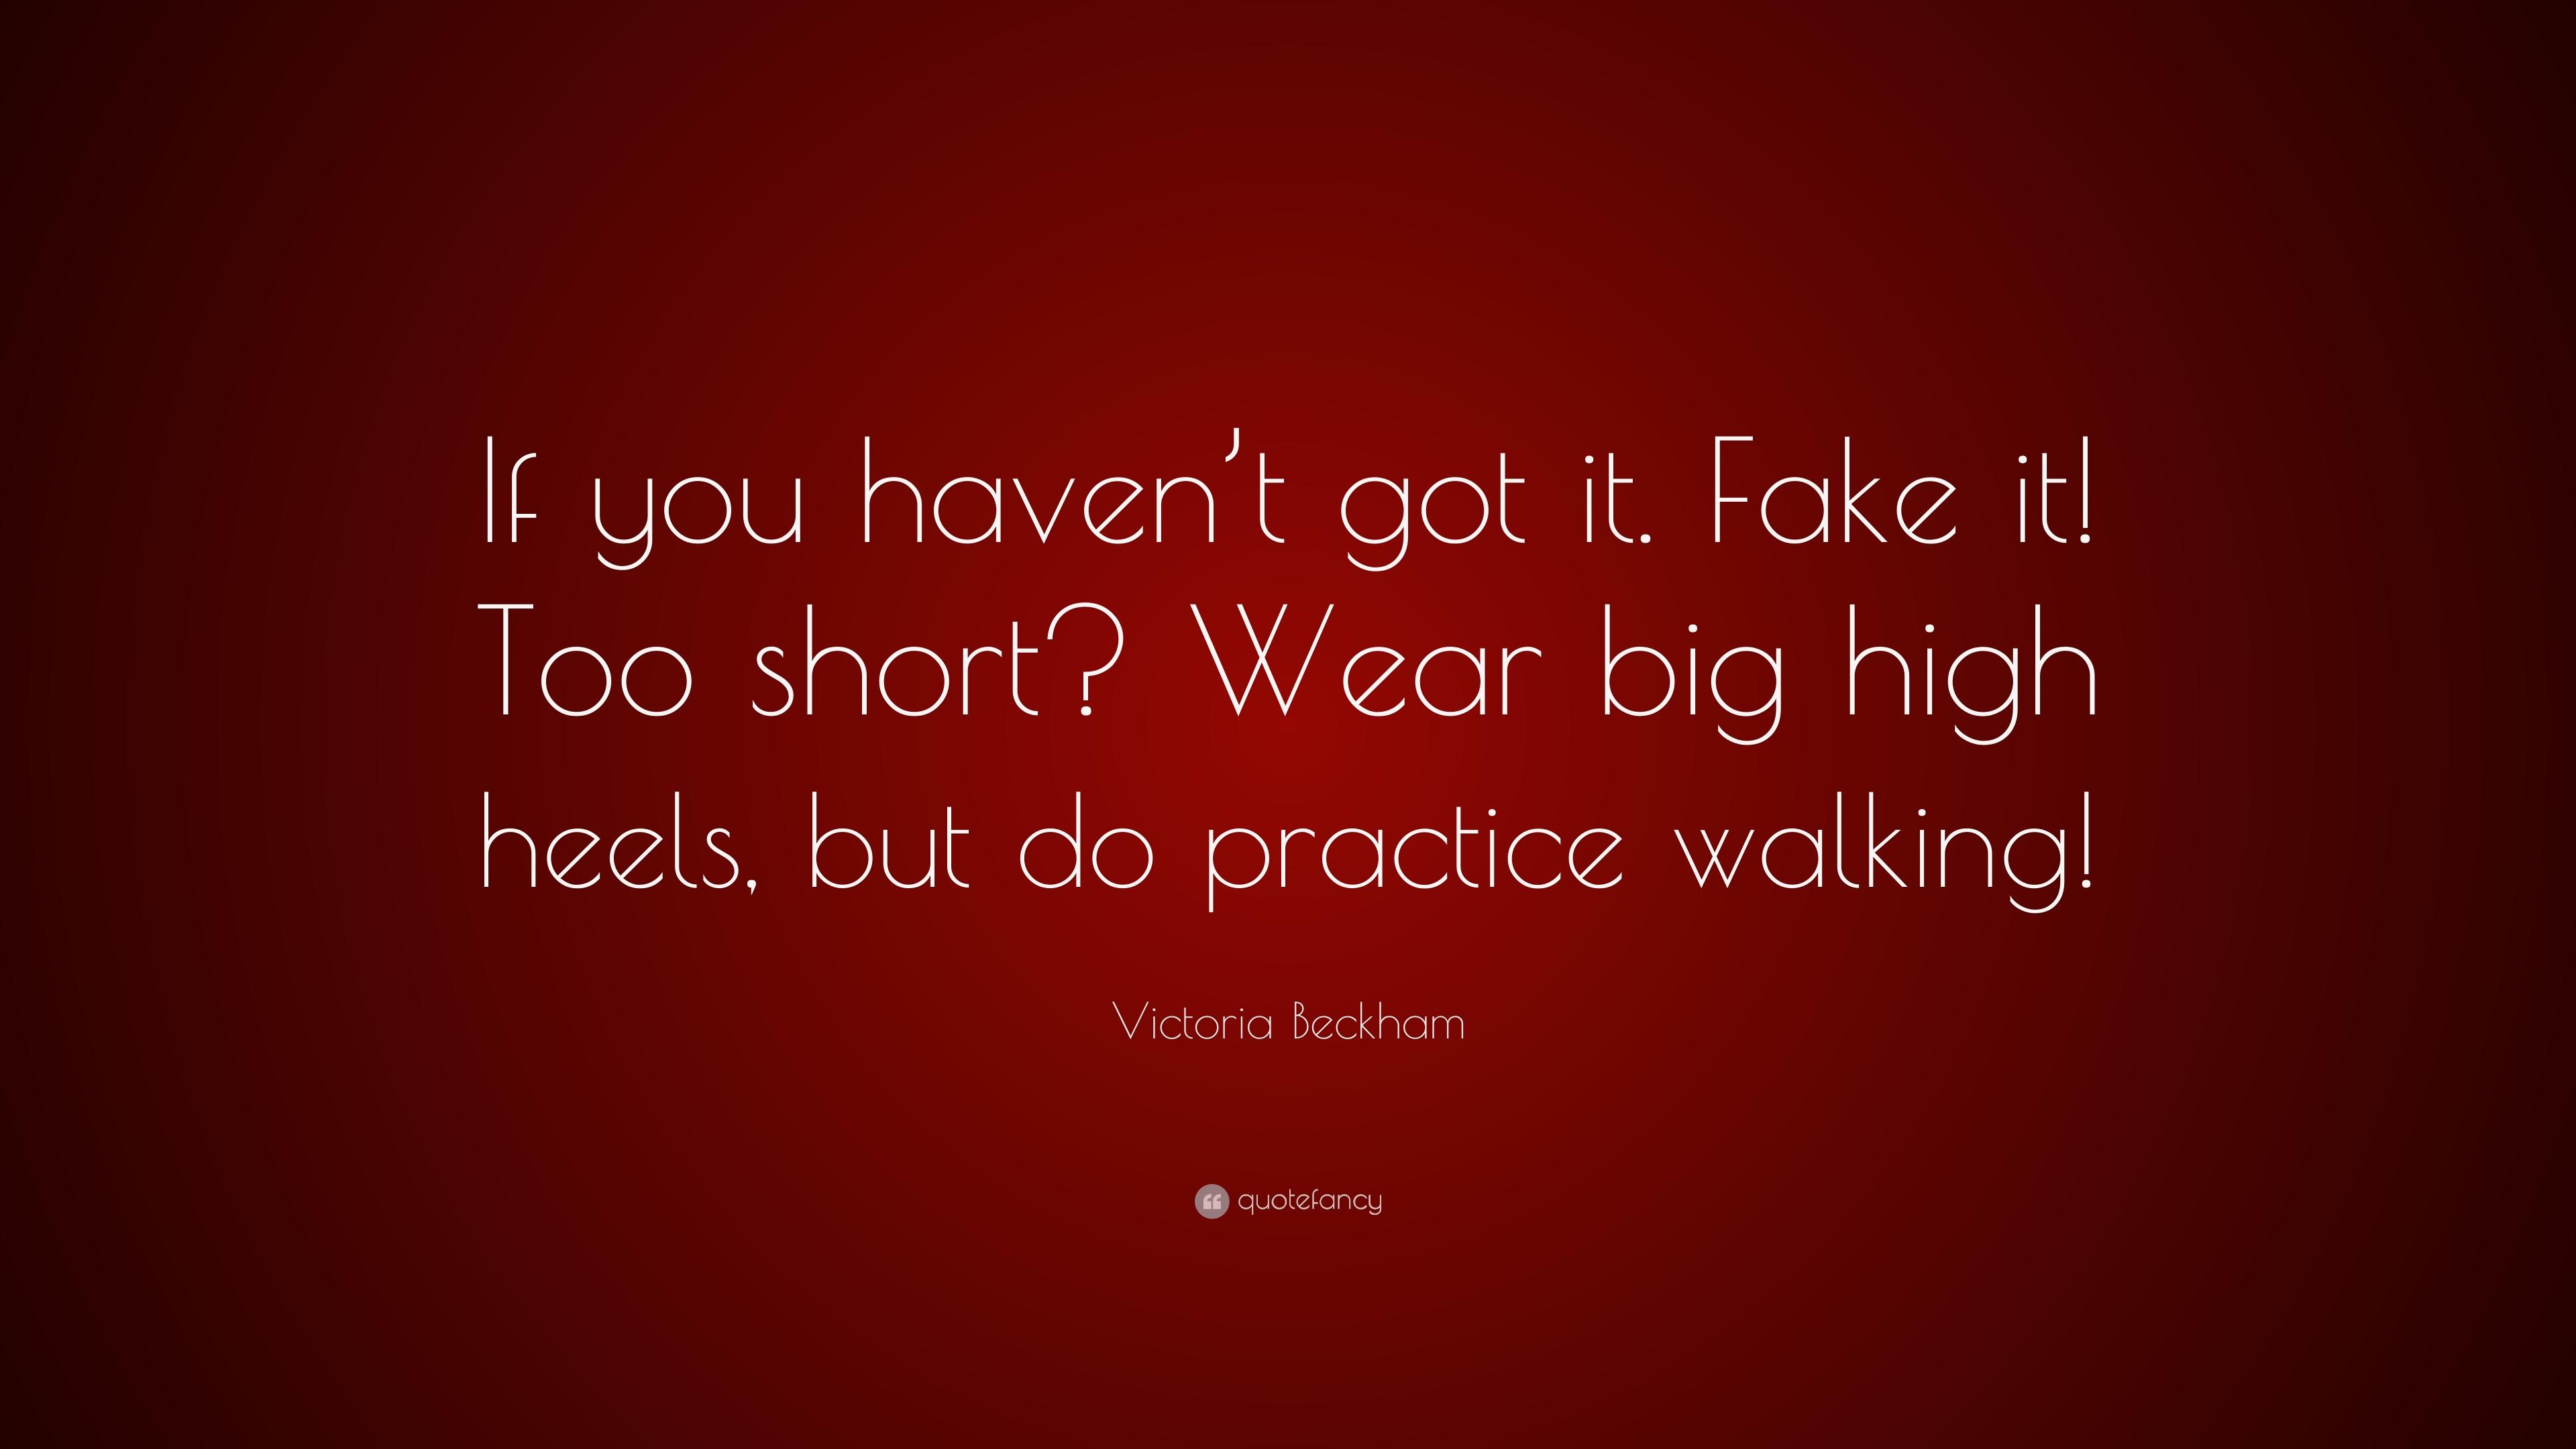 Victoria Beckham Quote: “If you haven't got it. Fake it! Too short